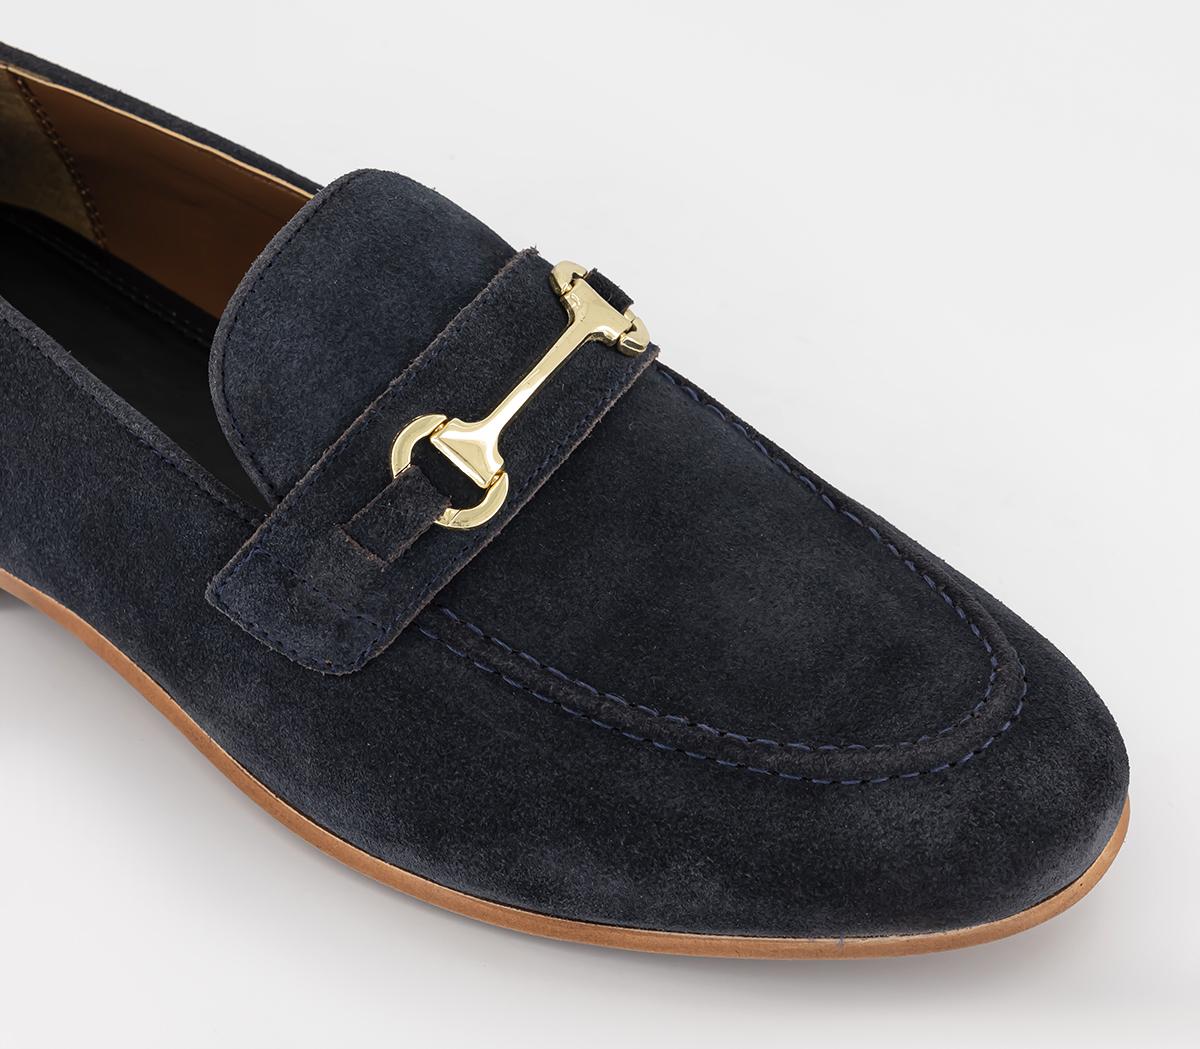 Walk London Terry Trim Loafers Navy Suede - Men’s Smart Shoes